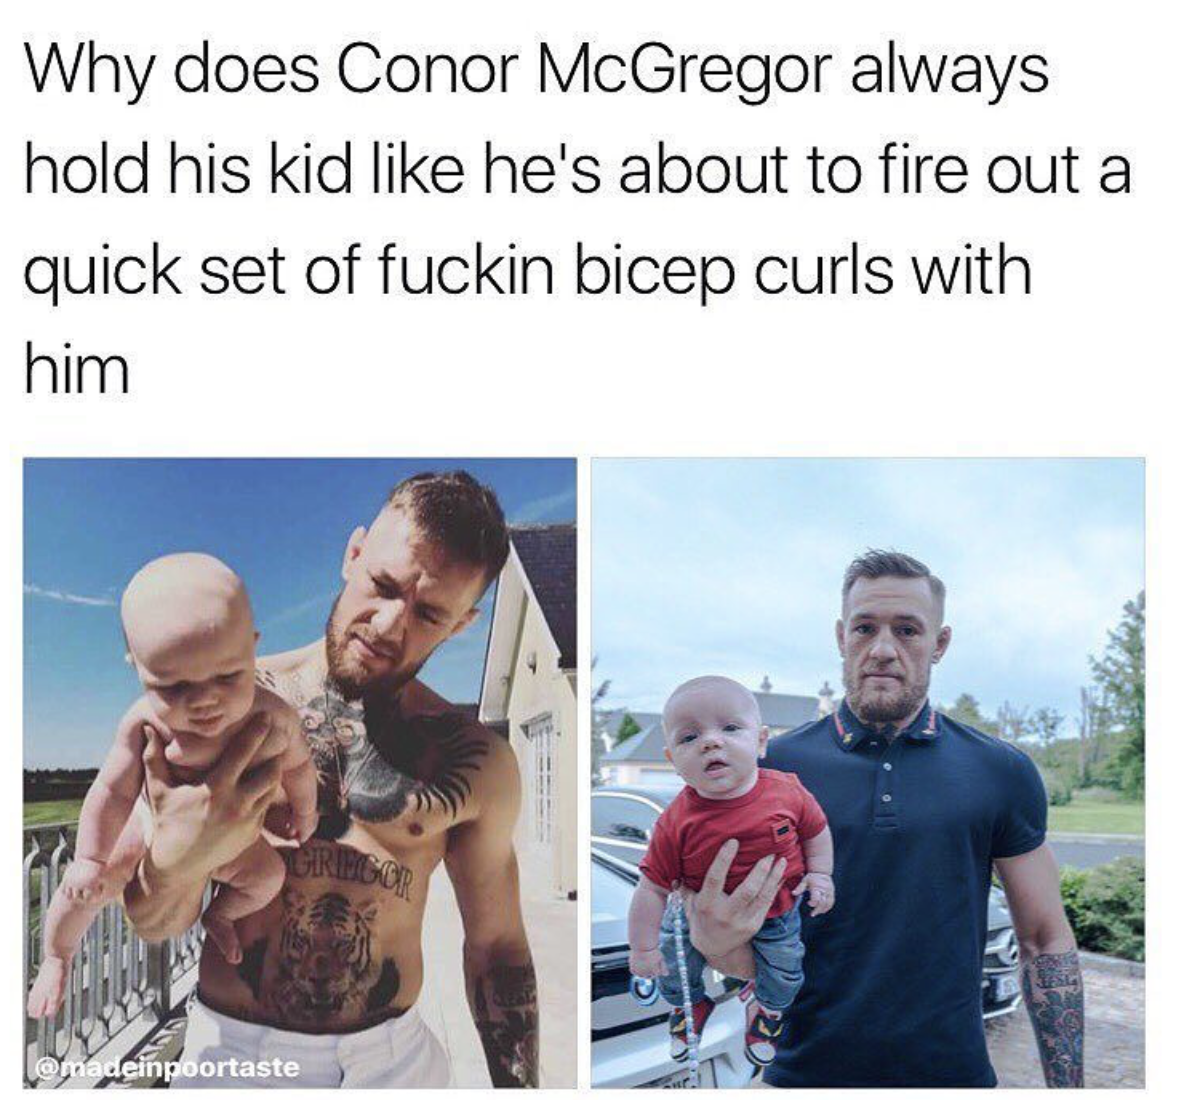 bicep curls with baby - Why does Conor McGregor always hold his kid he's about to fire out a quick set of fuckin bicep curls with him madeinpoortaste